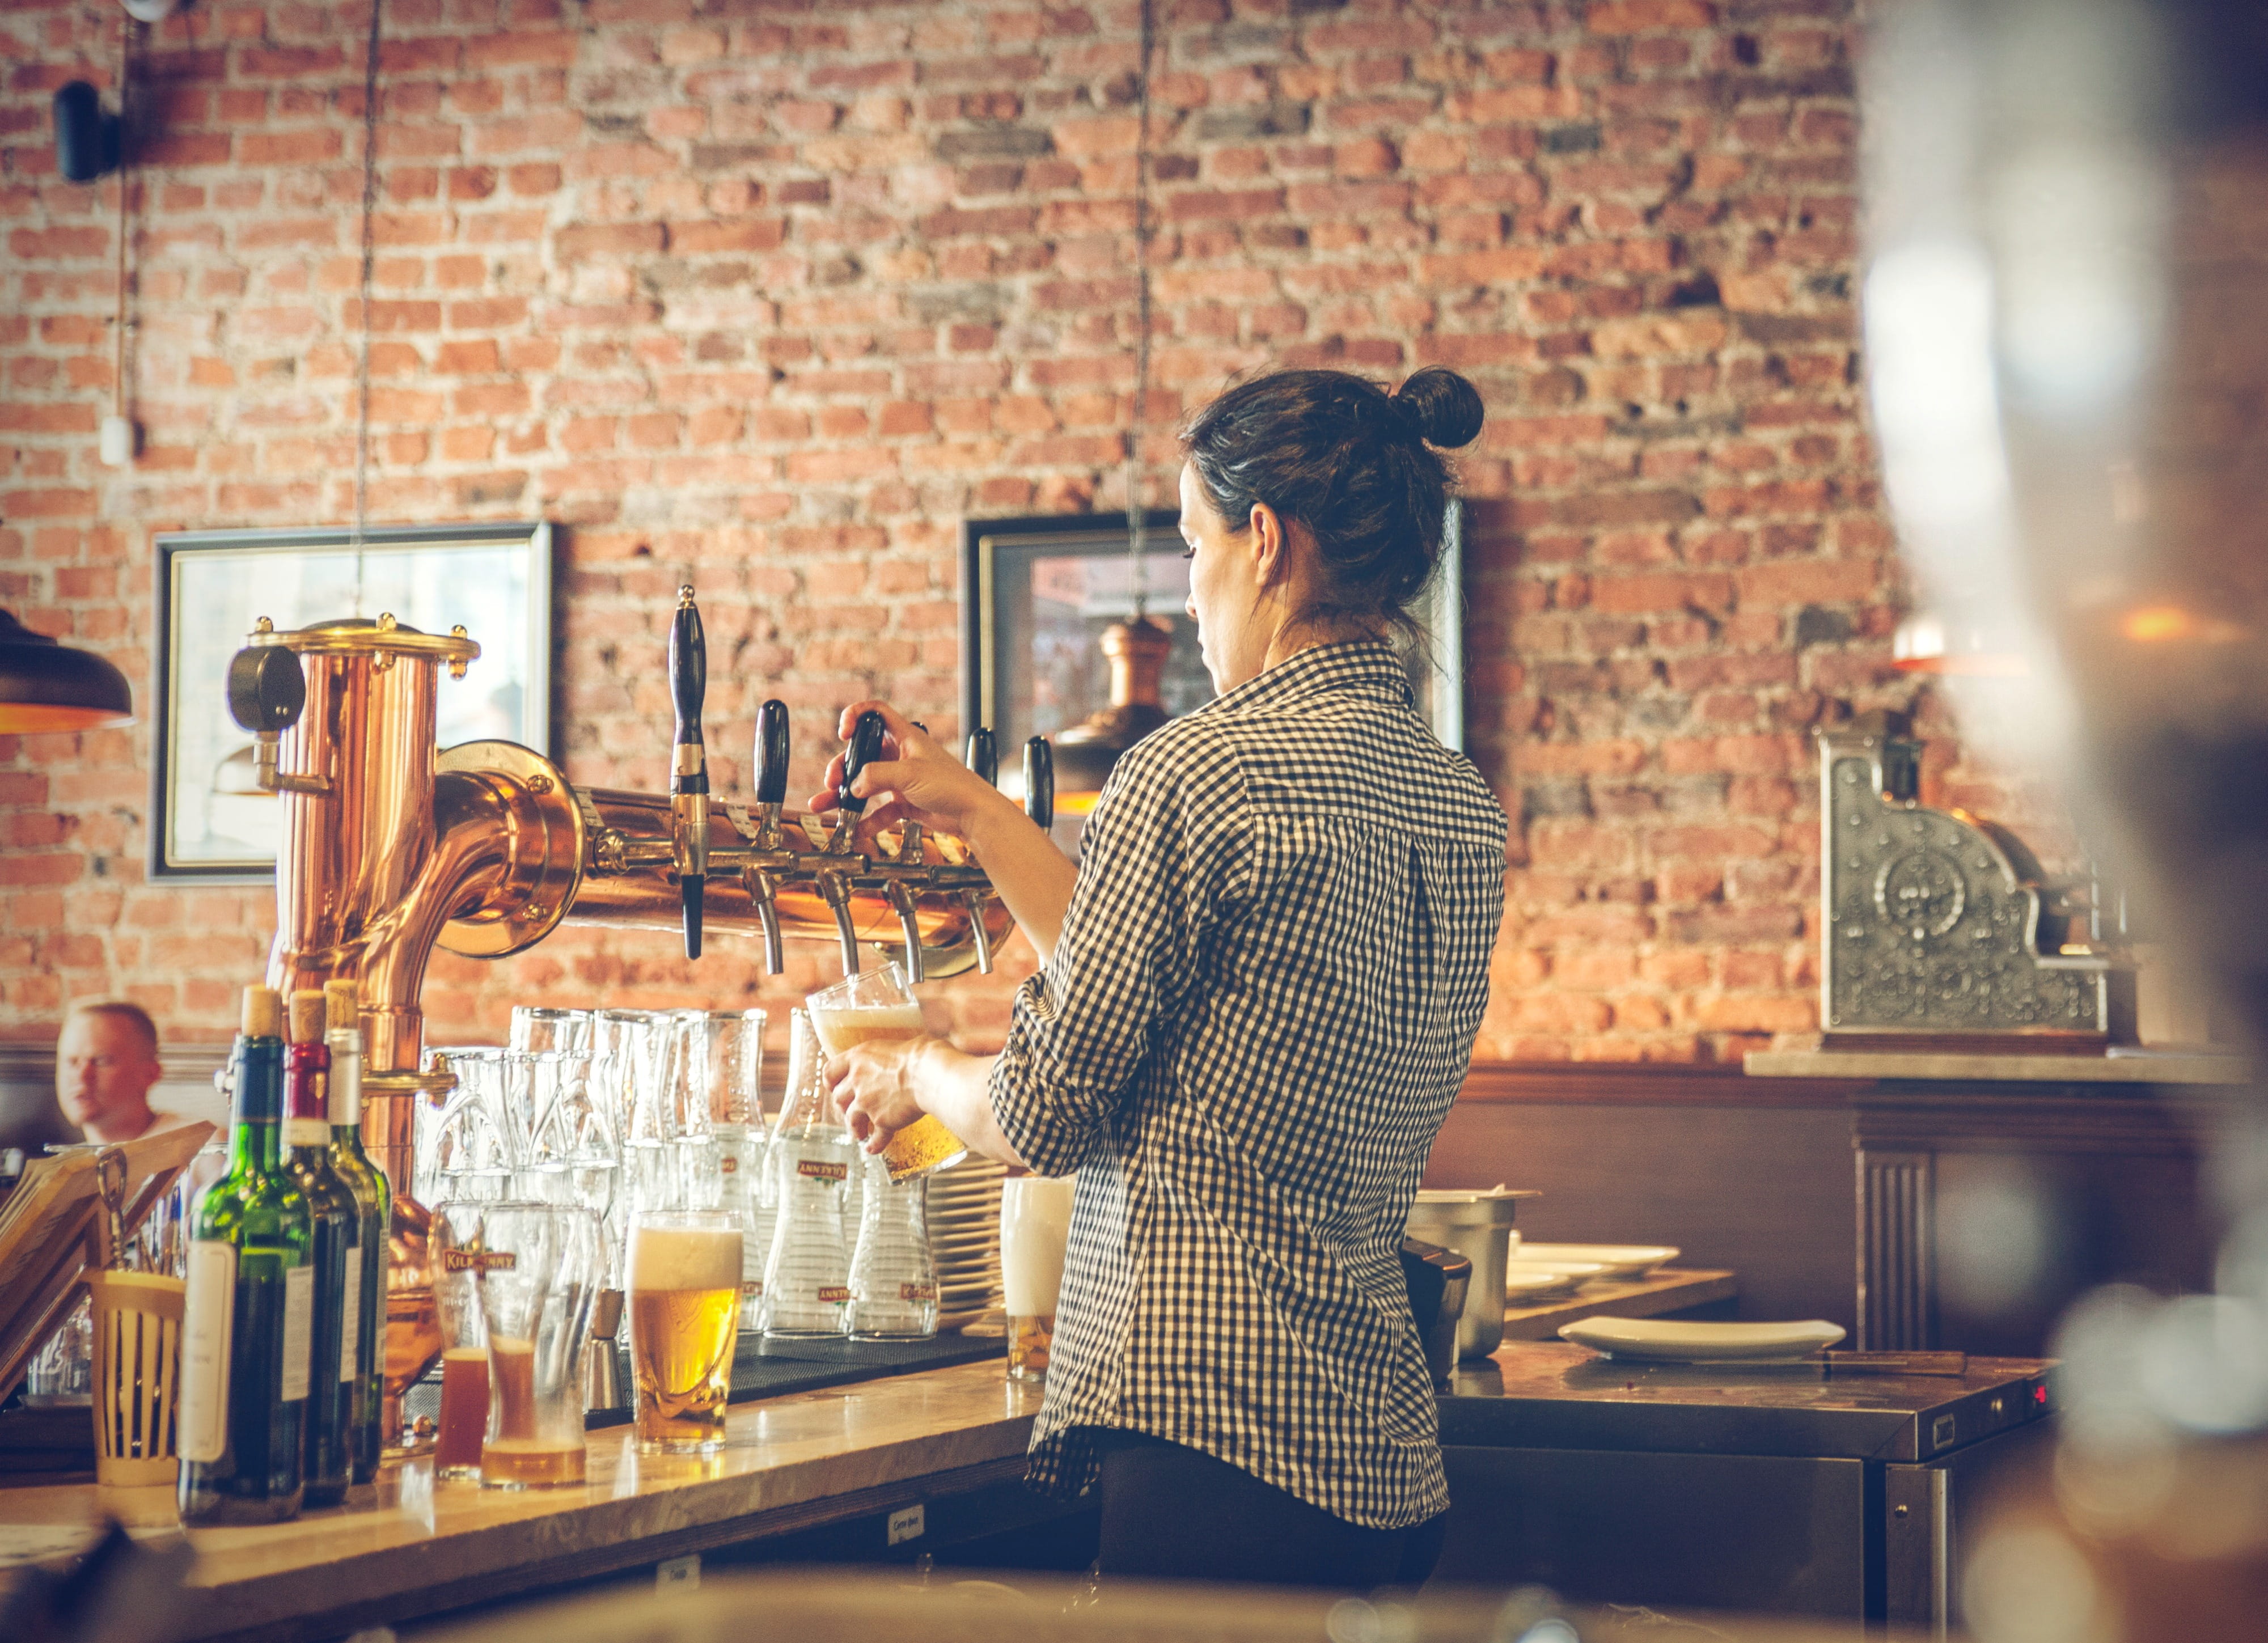 Photo of Bartender Pouring Draught Beer, alcohol, bar cafe, beer tap